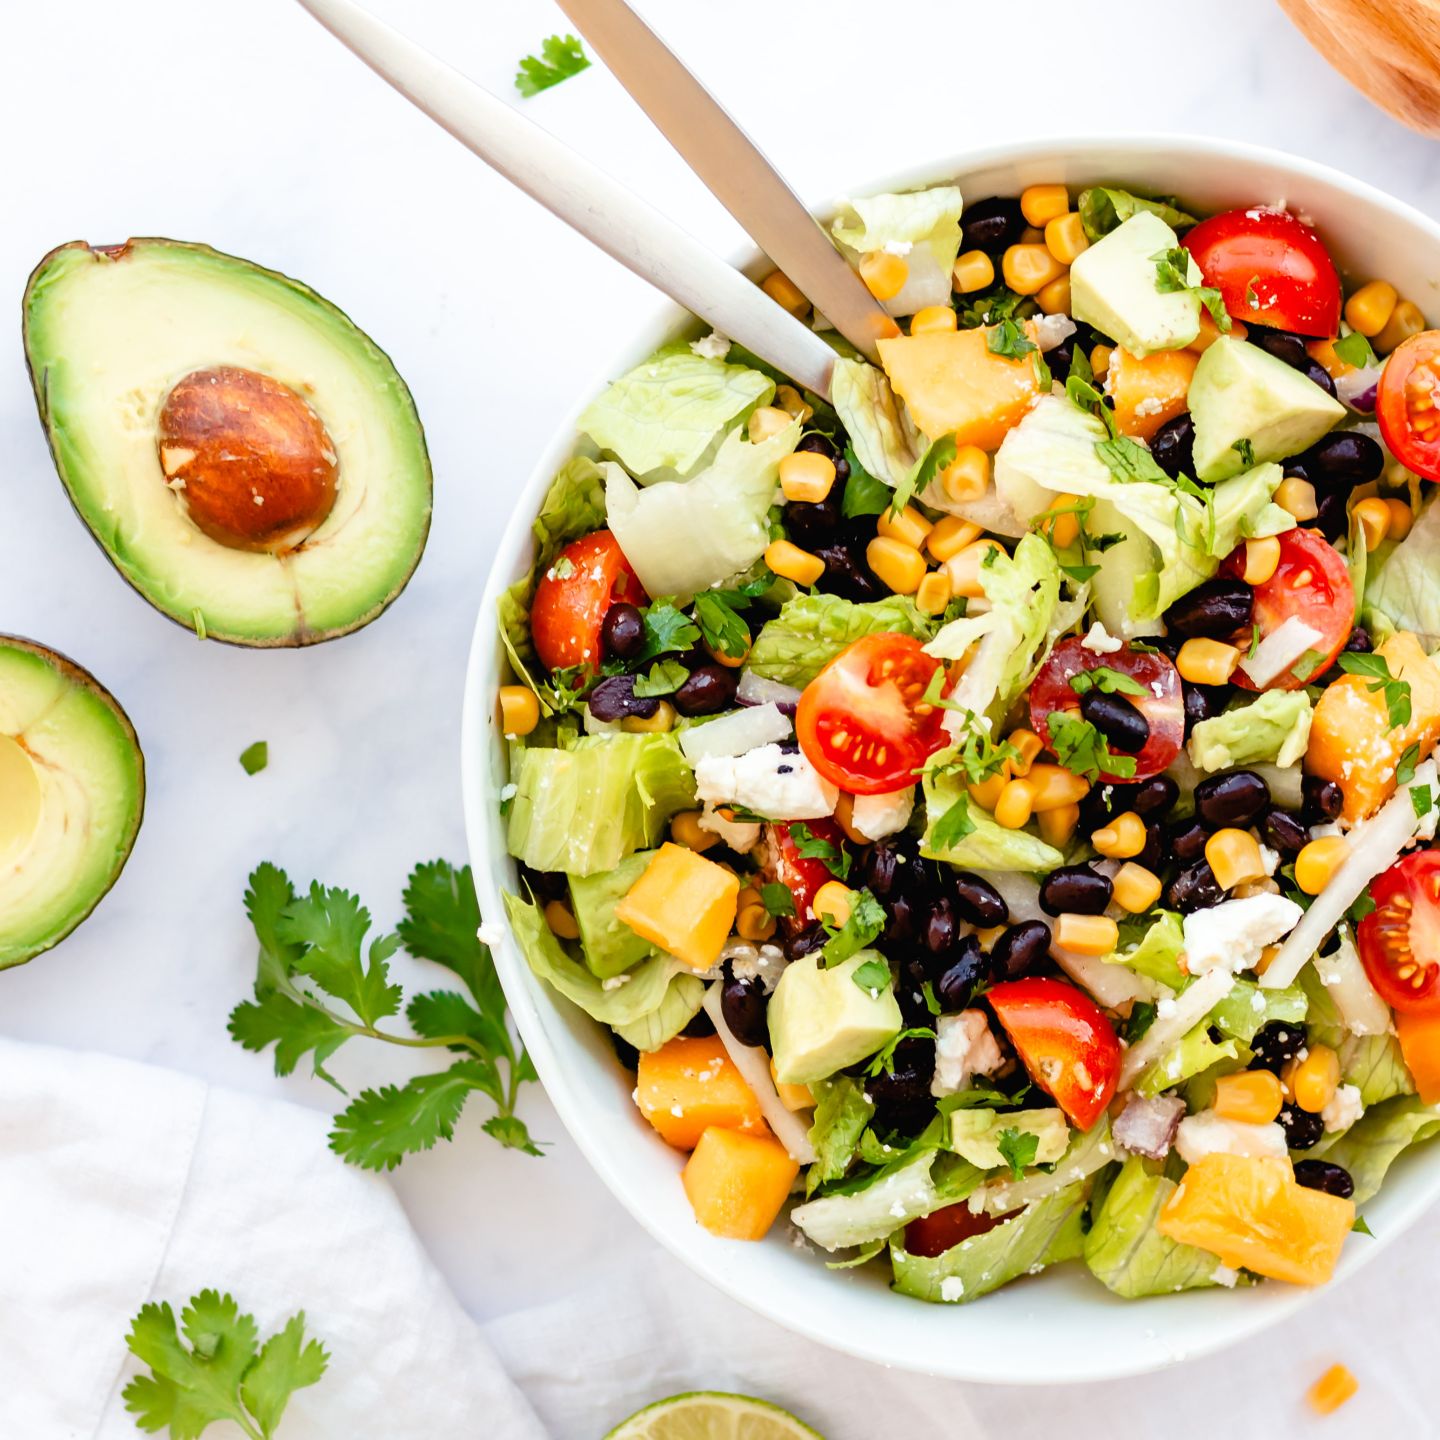 Mexican chopped salad with black beans, corn, avocado, and Mexican dressing.